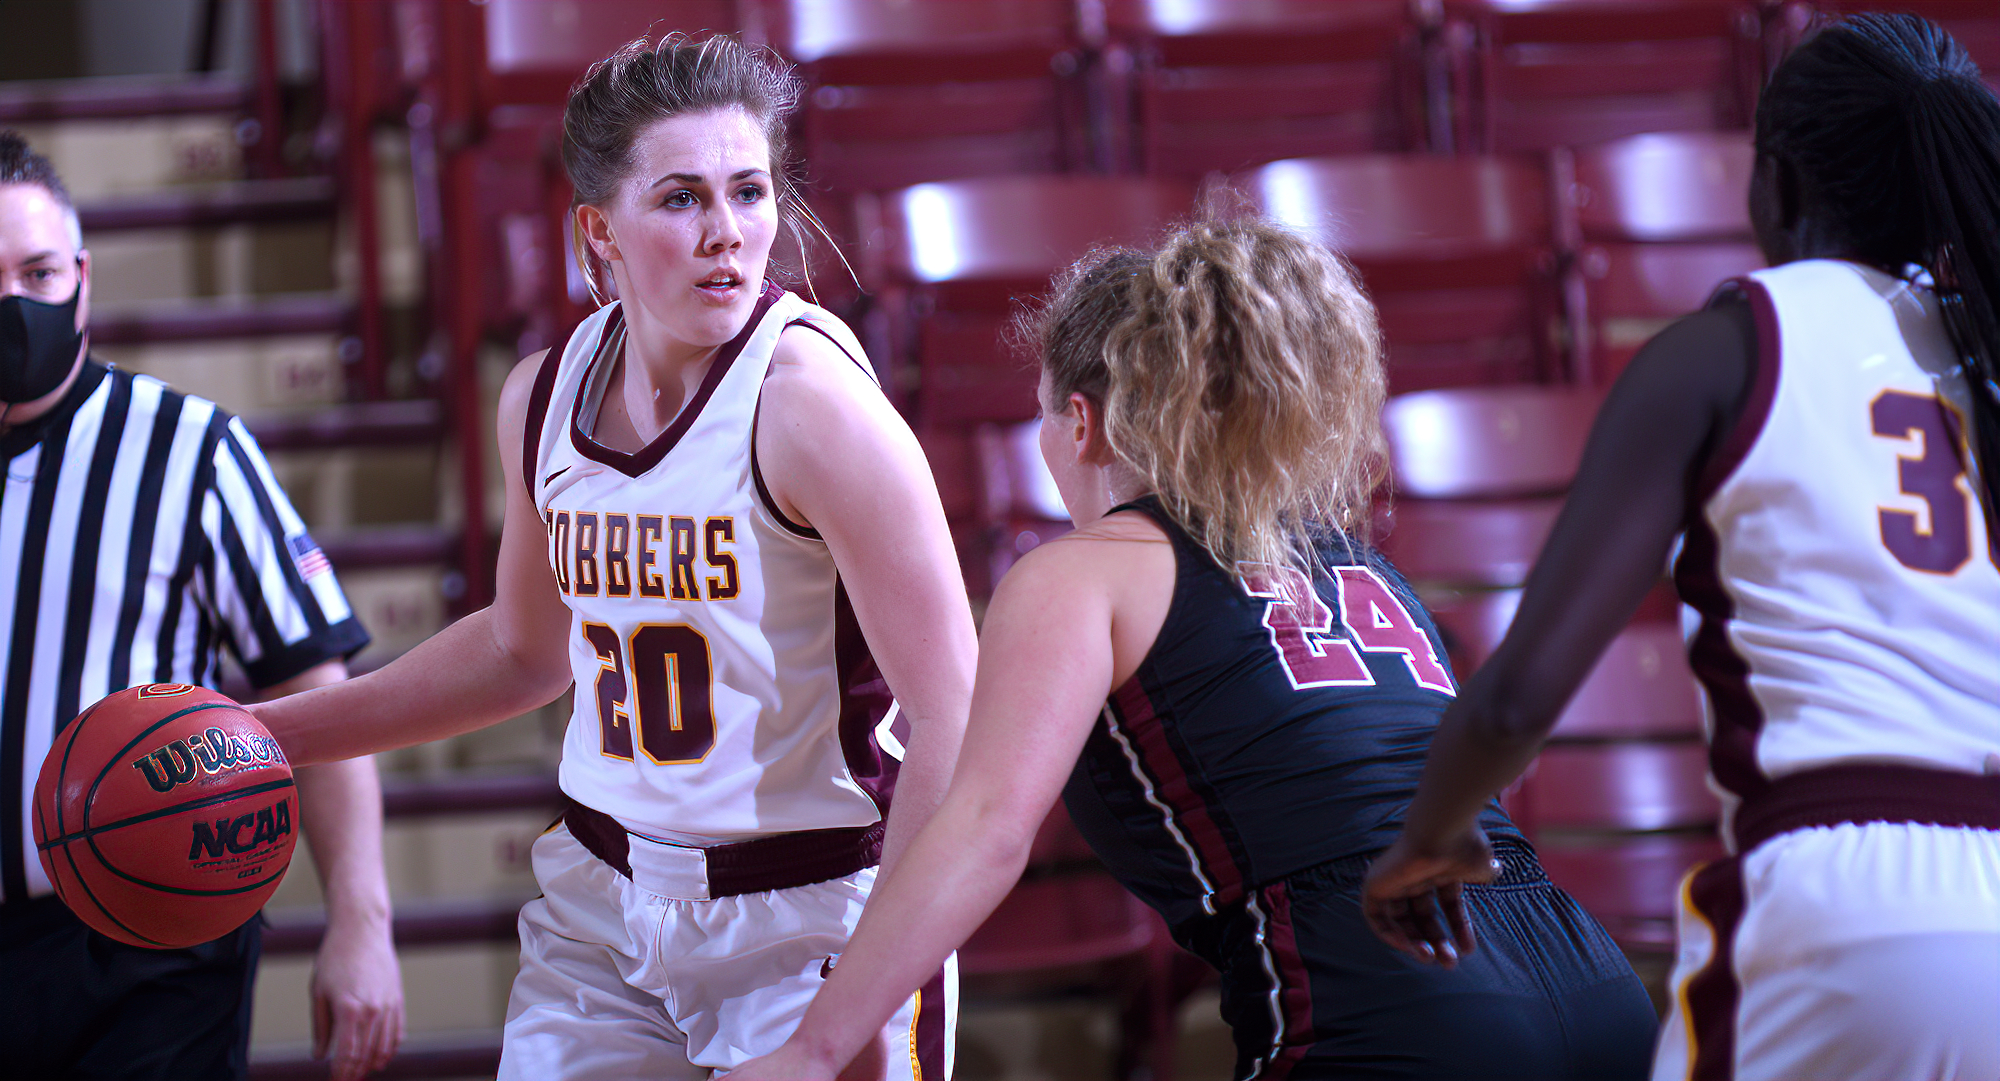 Sophomore Emily Beseman had a game-high 22 points and grabbed a team-high eight rebounds to help Concordia beat St. Ben's 71-62 in the season finale.